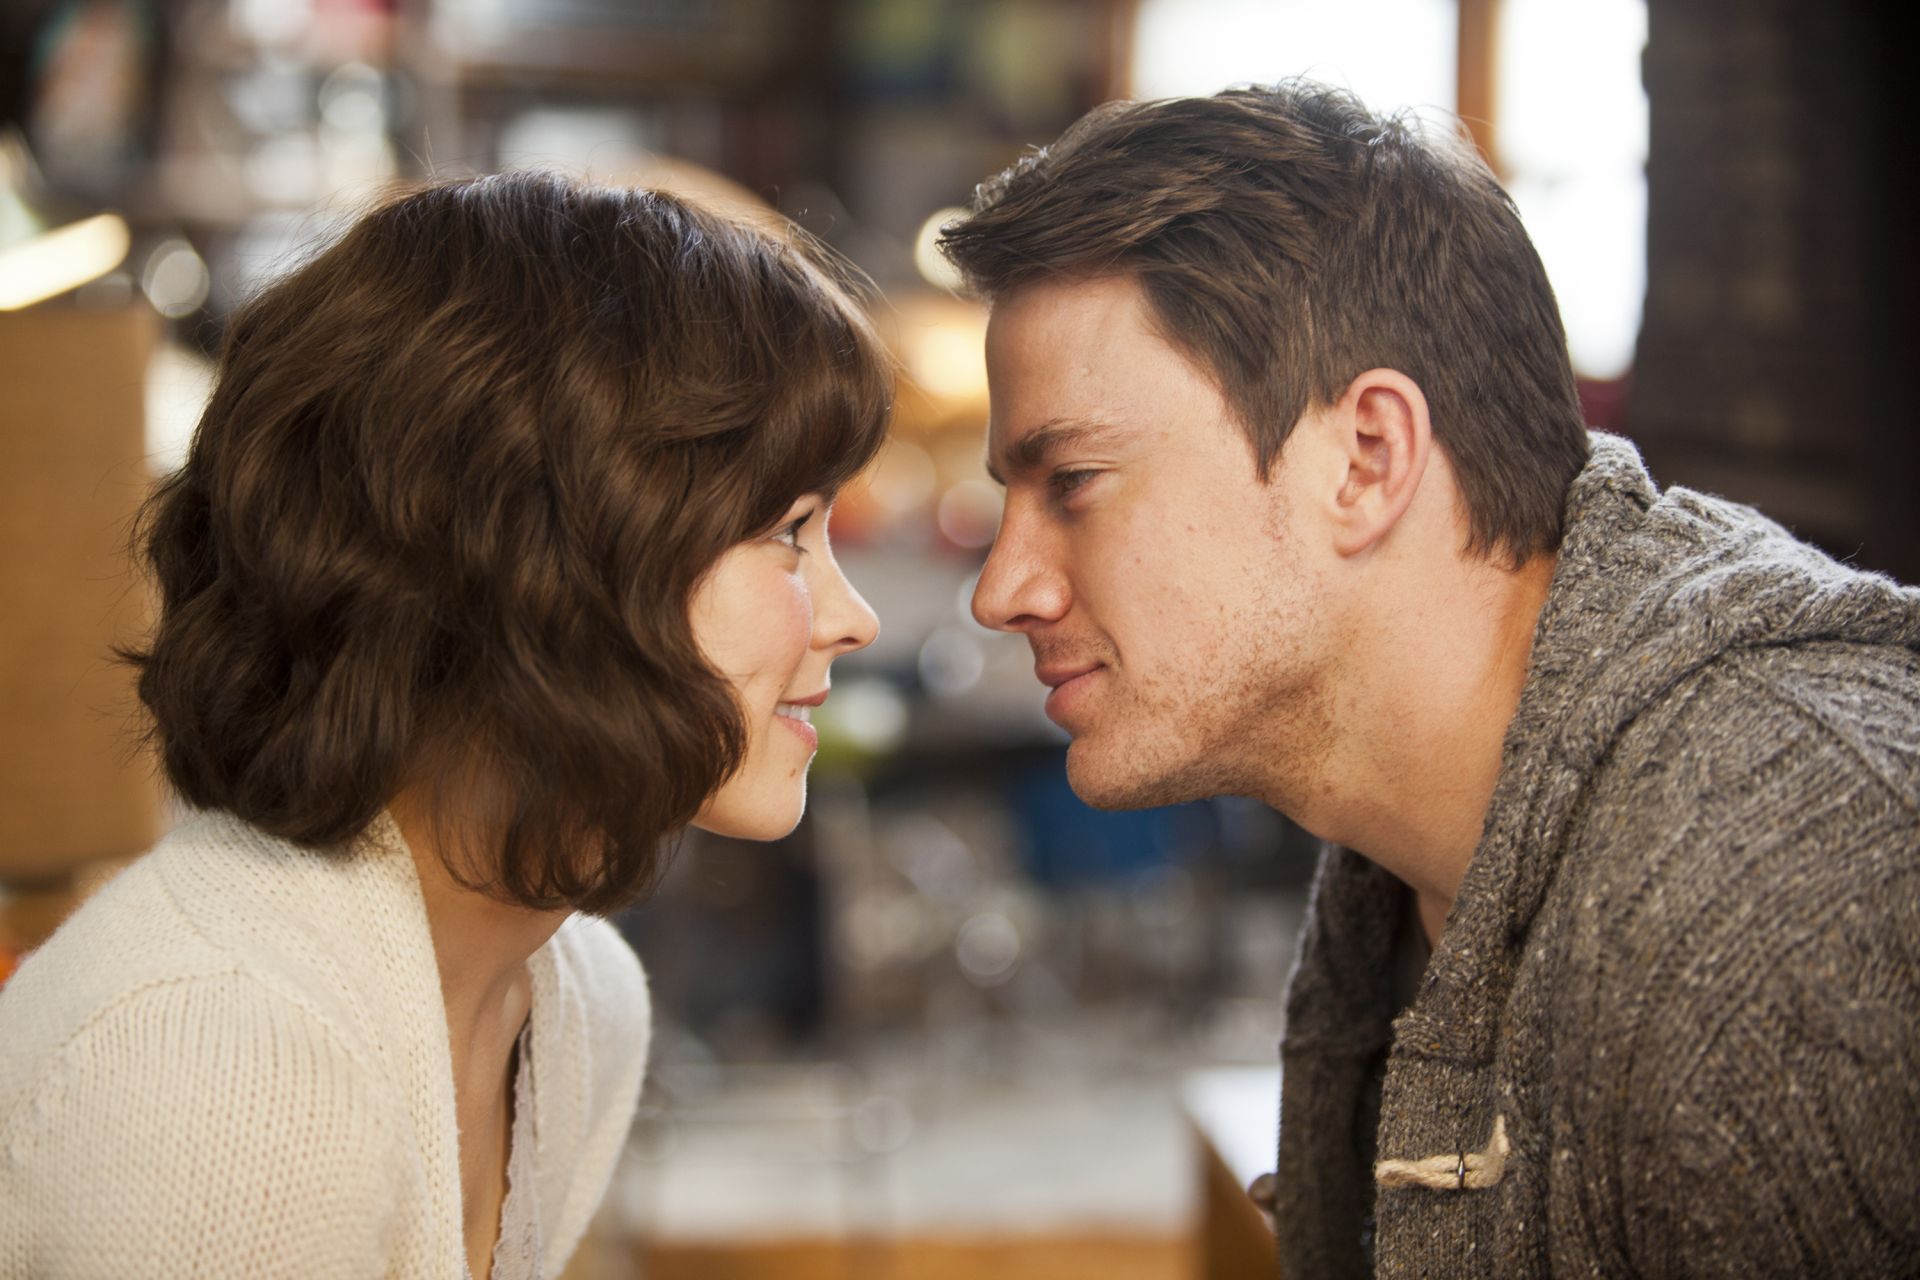 The Vow is barely worth a walk down the Aisle